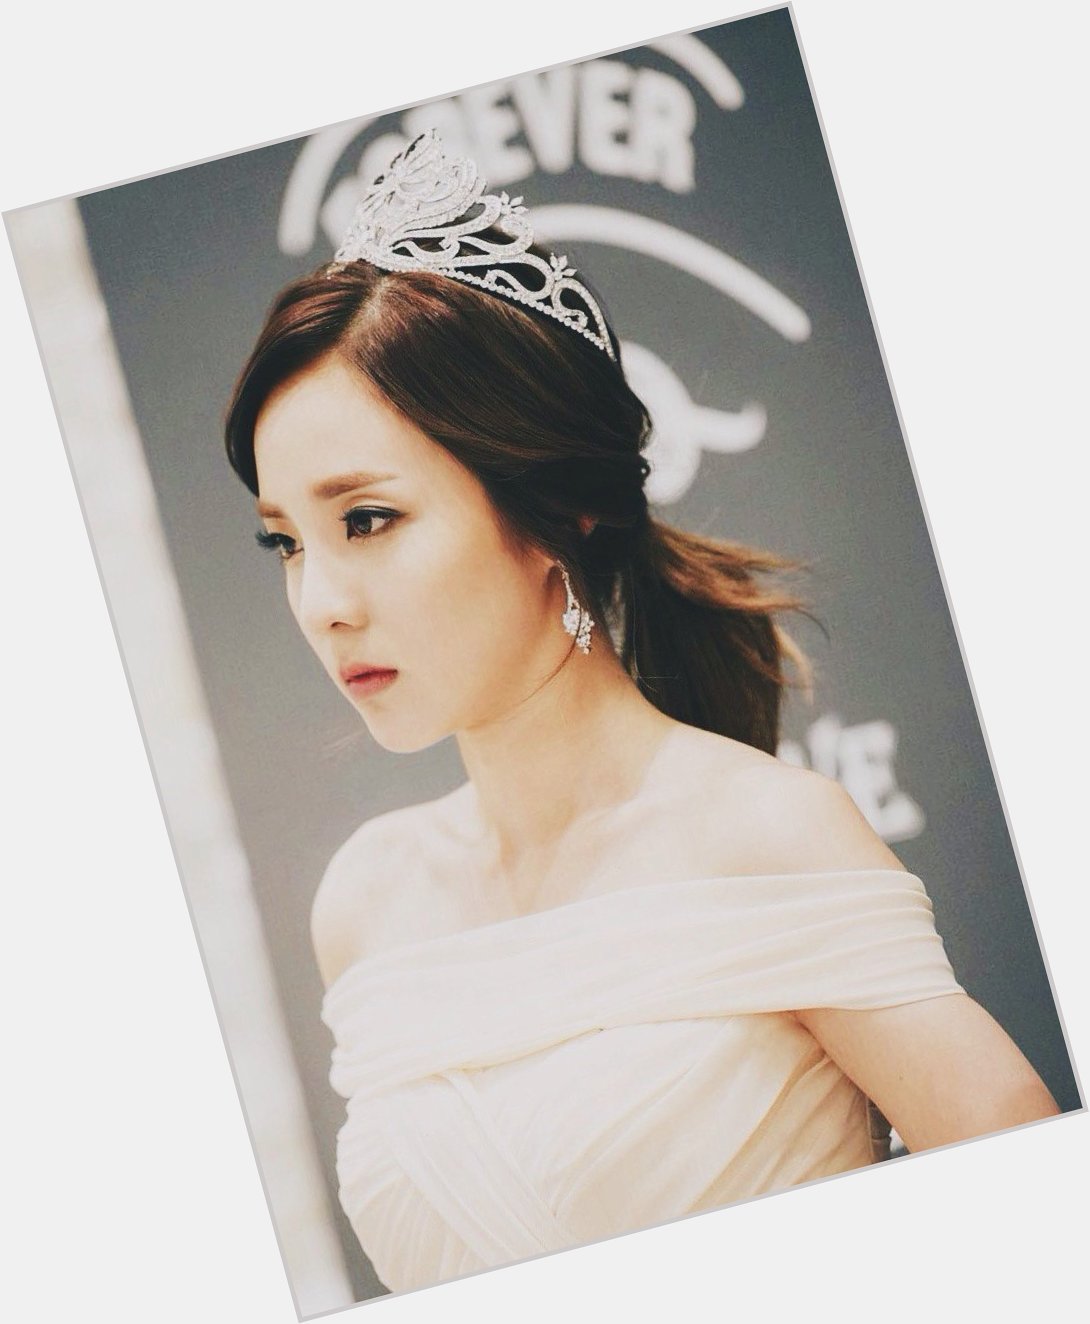  Happy birthday to the owner of the fountain of youth and the ever humble sandara park ;) 